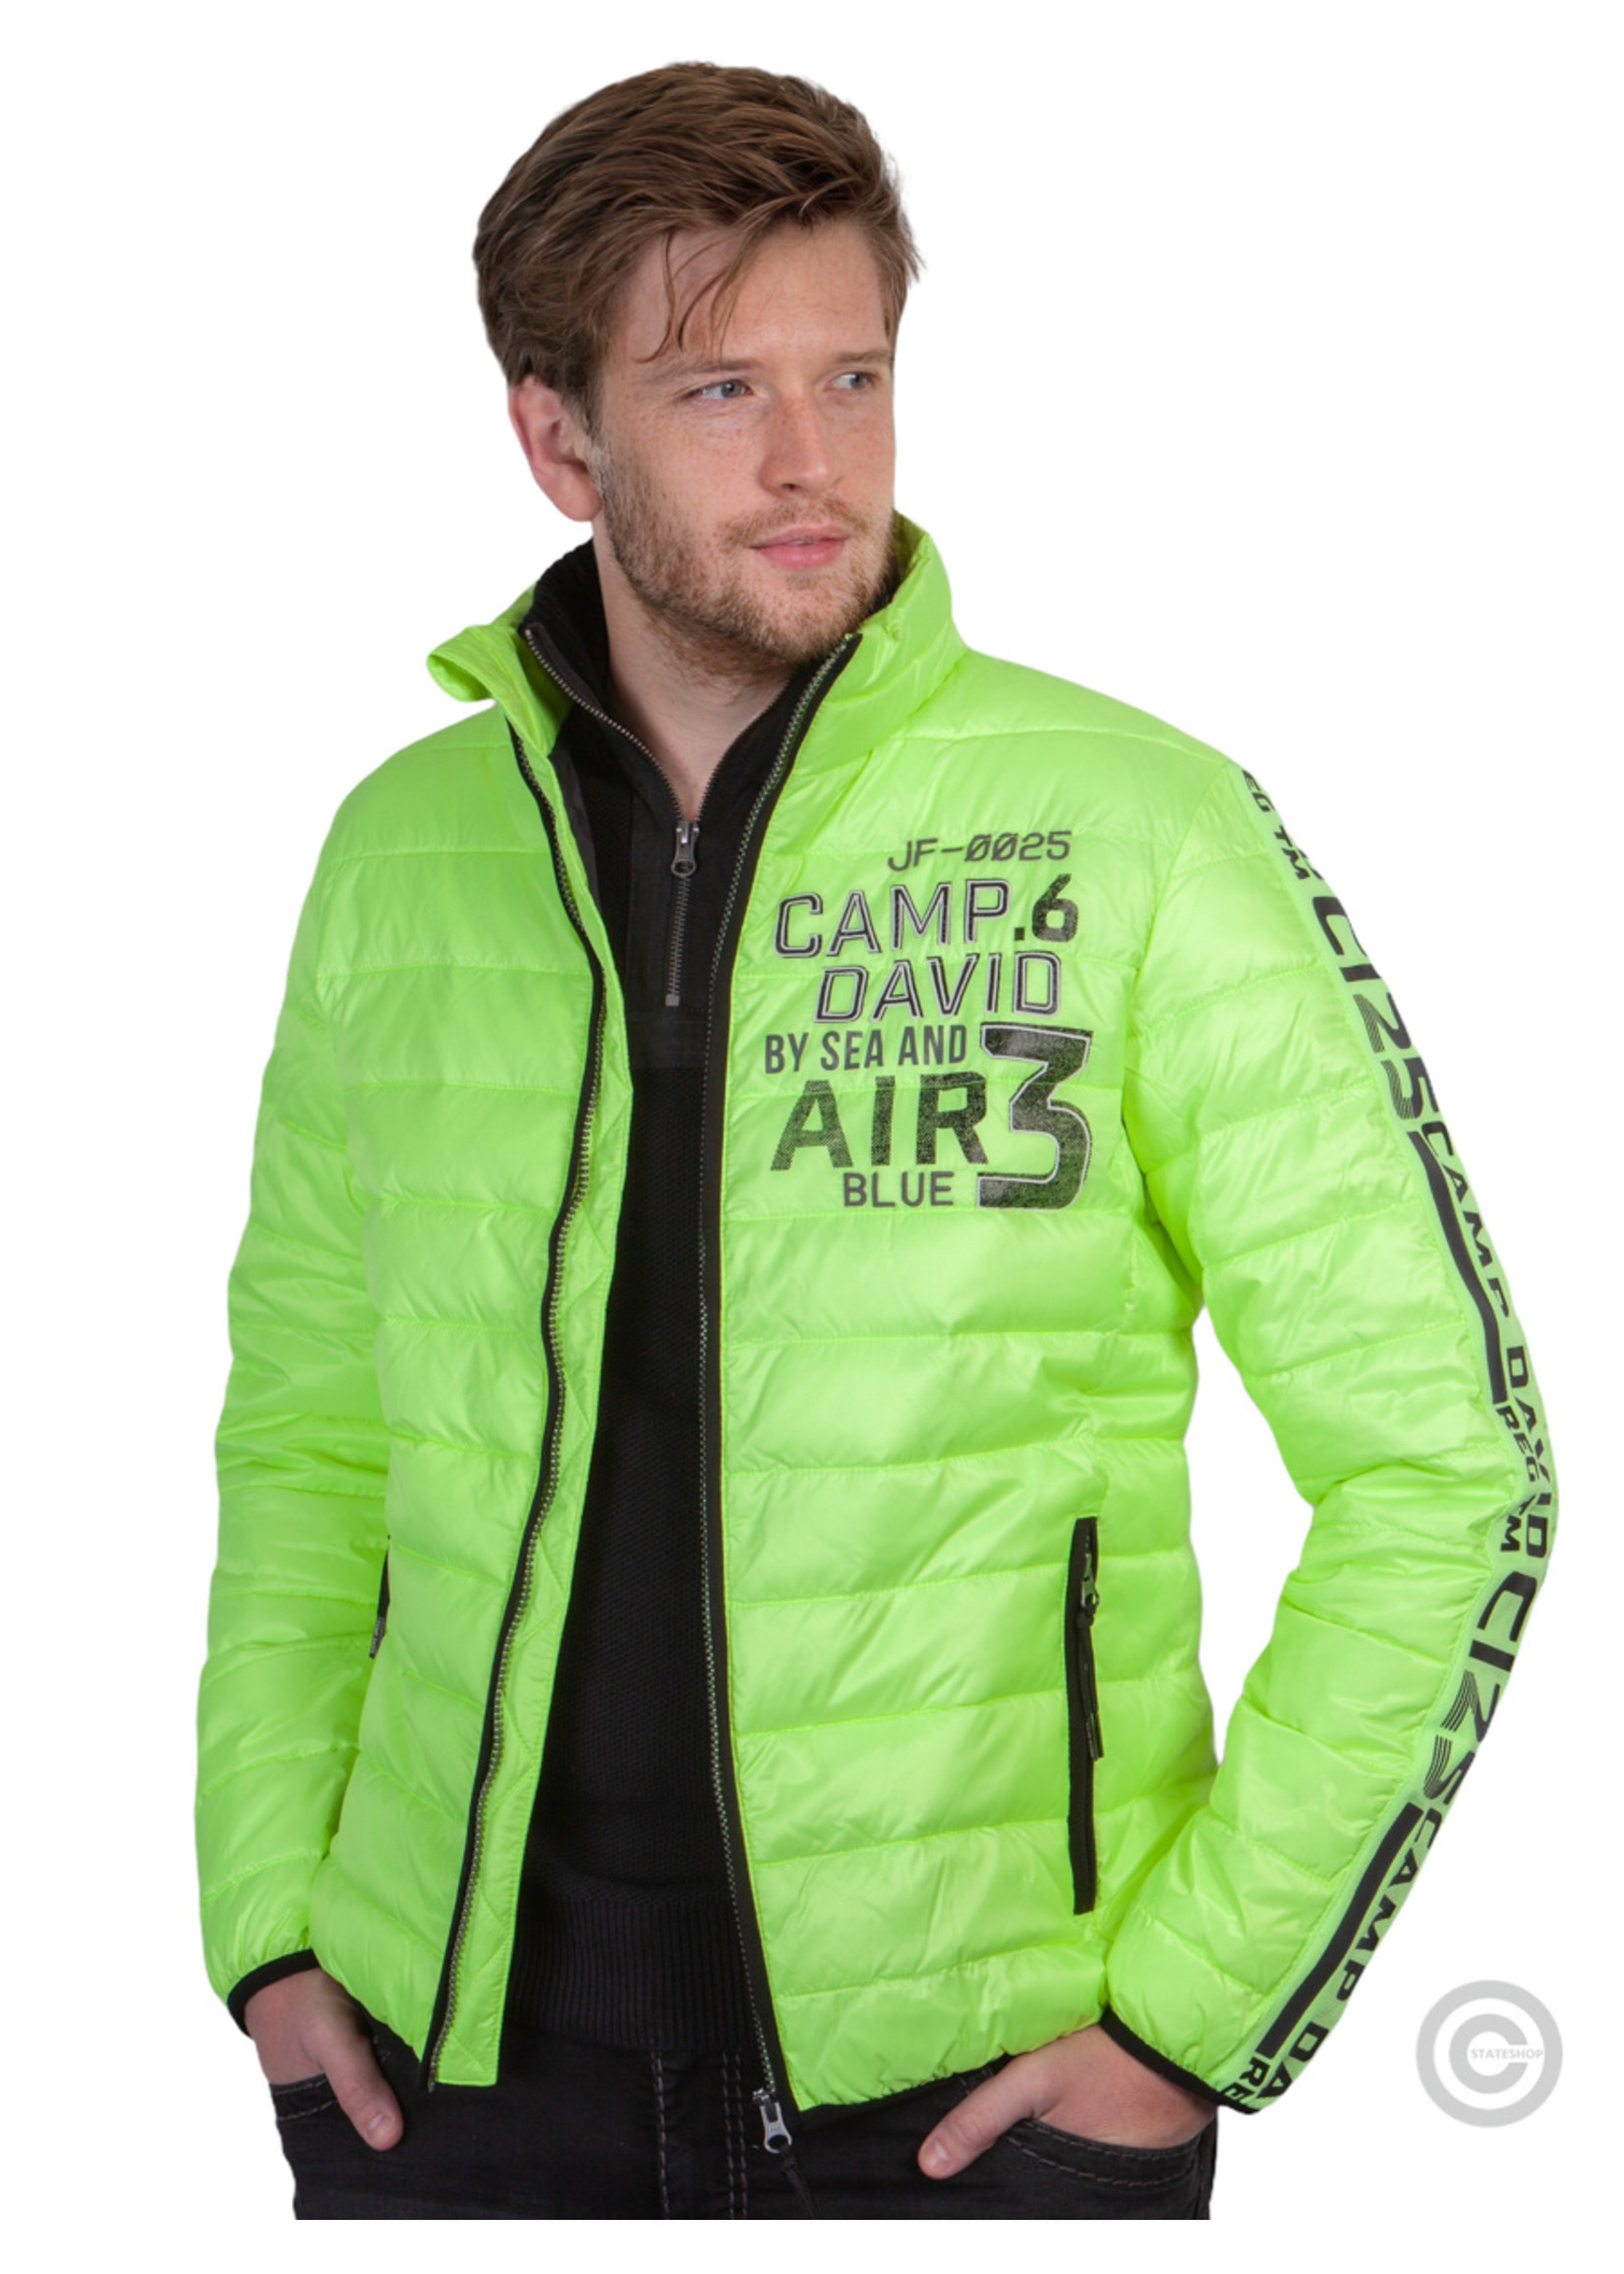 Camp David  Camp David quilted jacket with logo tapes and artwork